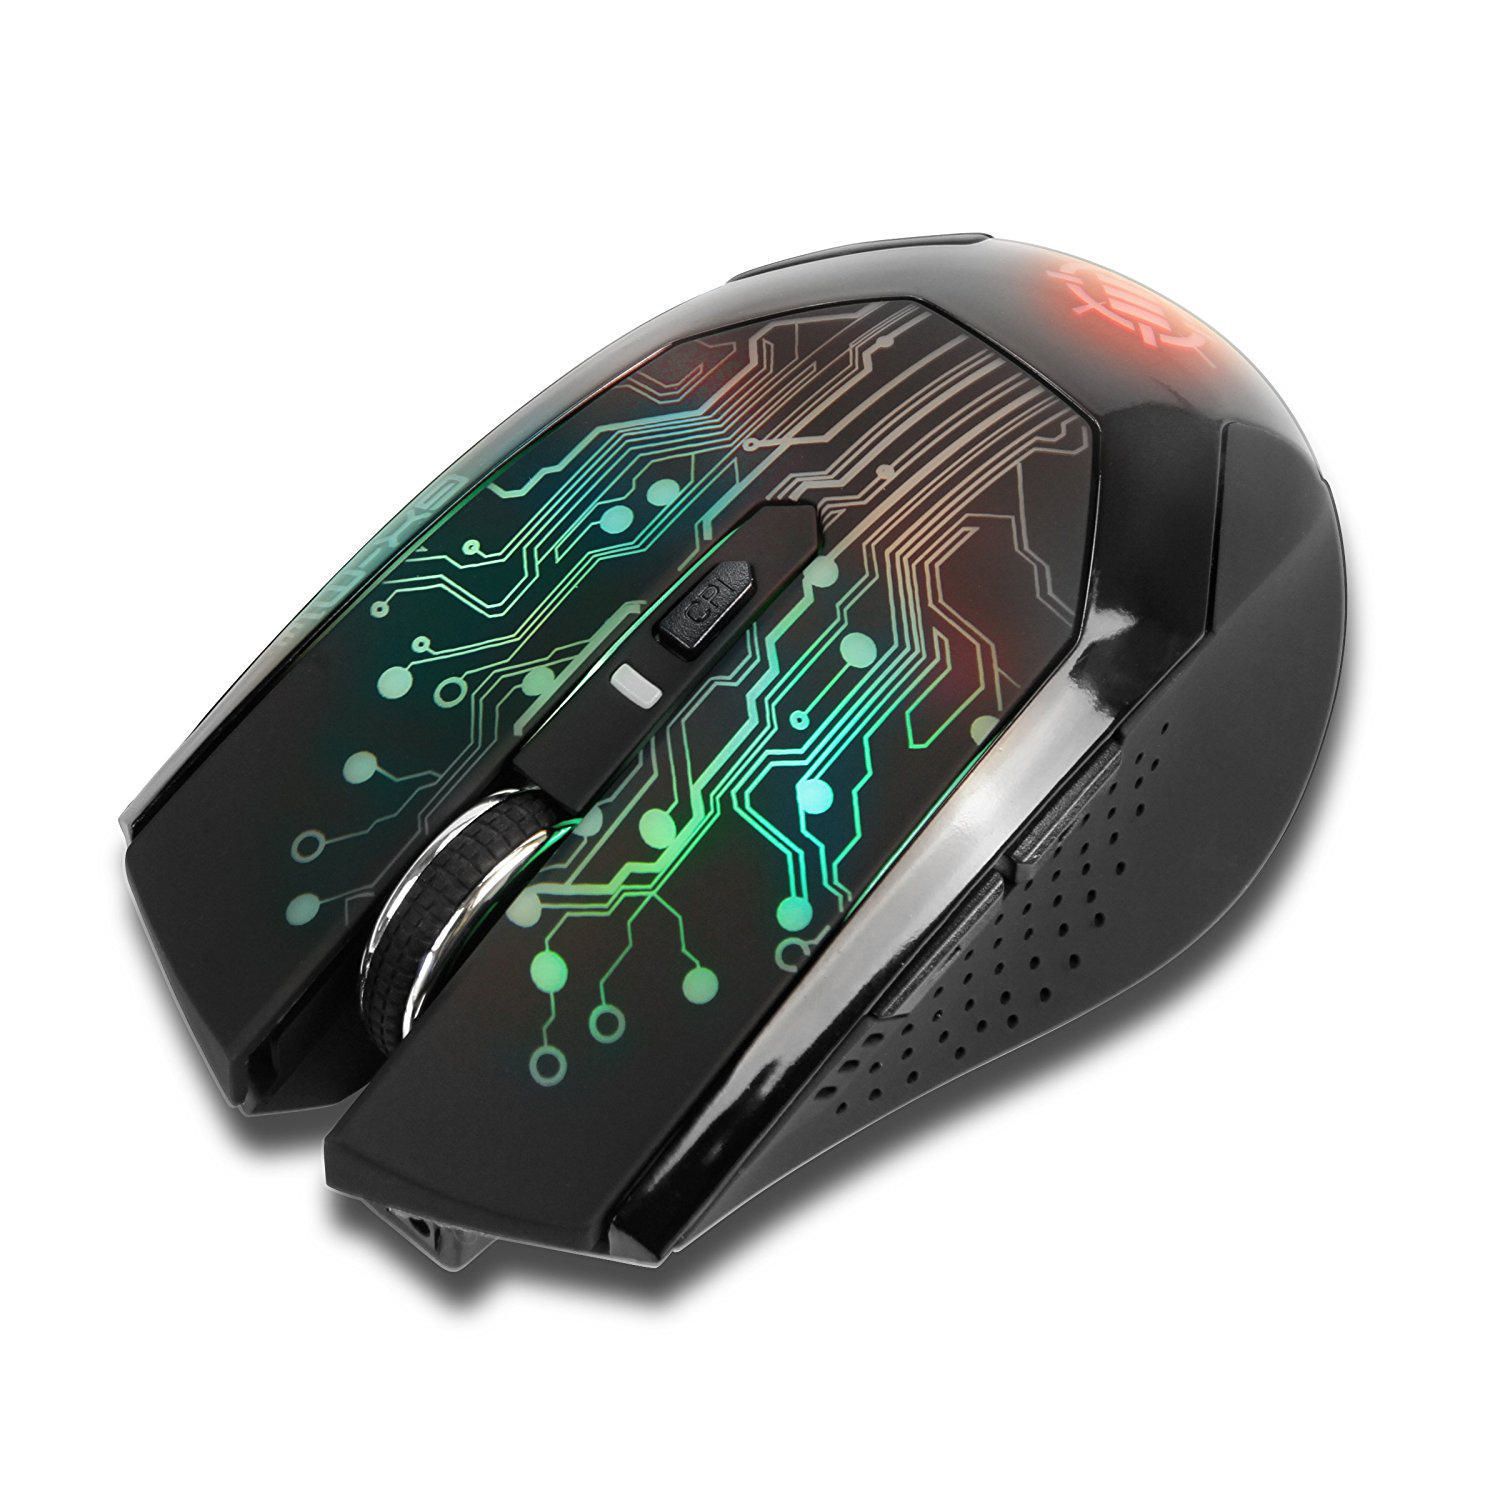 Enhance Voltaic 3500 Dpi Wireless Optical LED Gaming Mouse with 2.4GHz